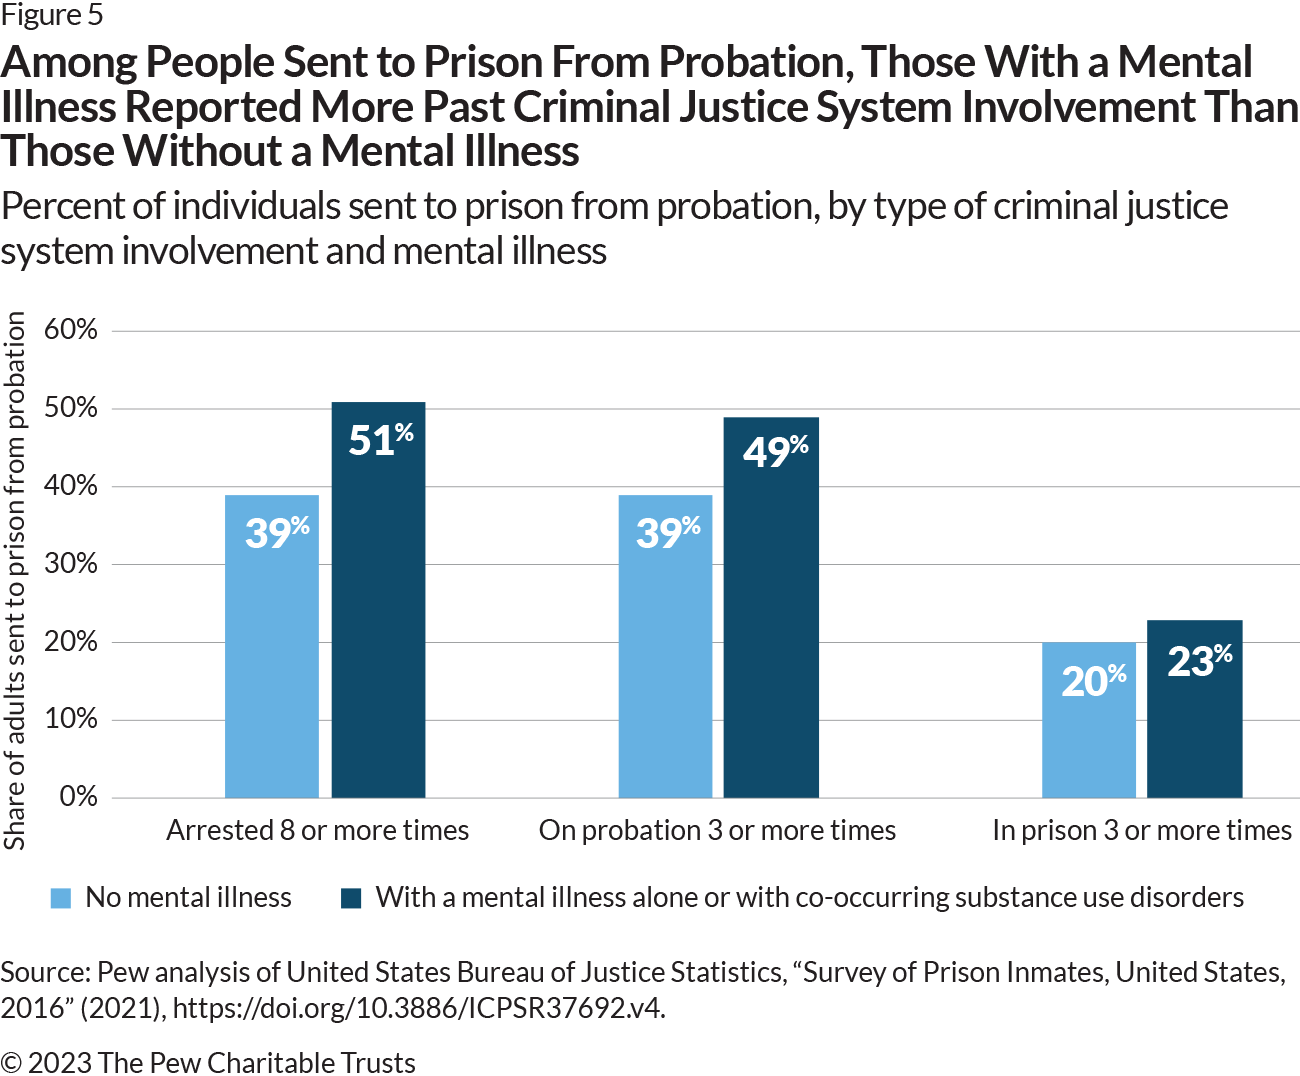 A column chart showing that, among people sent to prison from probation, individuals with a mental illness alone or with co-occurring substance use disorders, relative to those without, had more past criminal justice system involvement. The chart is presented in three sections to represent different types of criminal justice involvement: arrested eight or more times, on probation three or more times, and in prison three or more times. Among people arrested eight or more times, 51% had a mental illness and 39% did not. Among people on probation three or more times, 49% had a mental illness and 39% did not. Among people in prison three or more times, 23% had a mental illness and 20% did not. People with a mental illness alone or with a co-occurring substance use disorder are represented with orange bars, and people without a mental illness are represented with blue bars. 